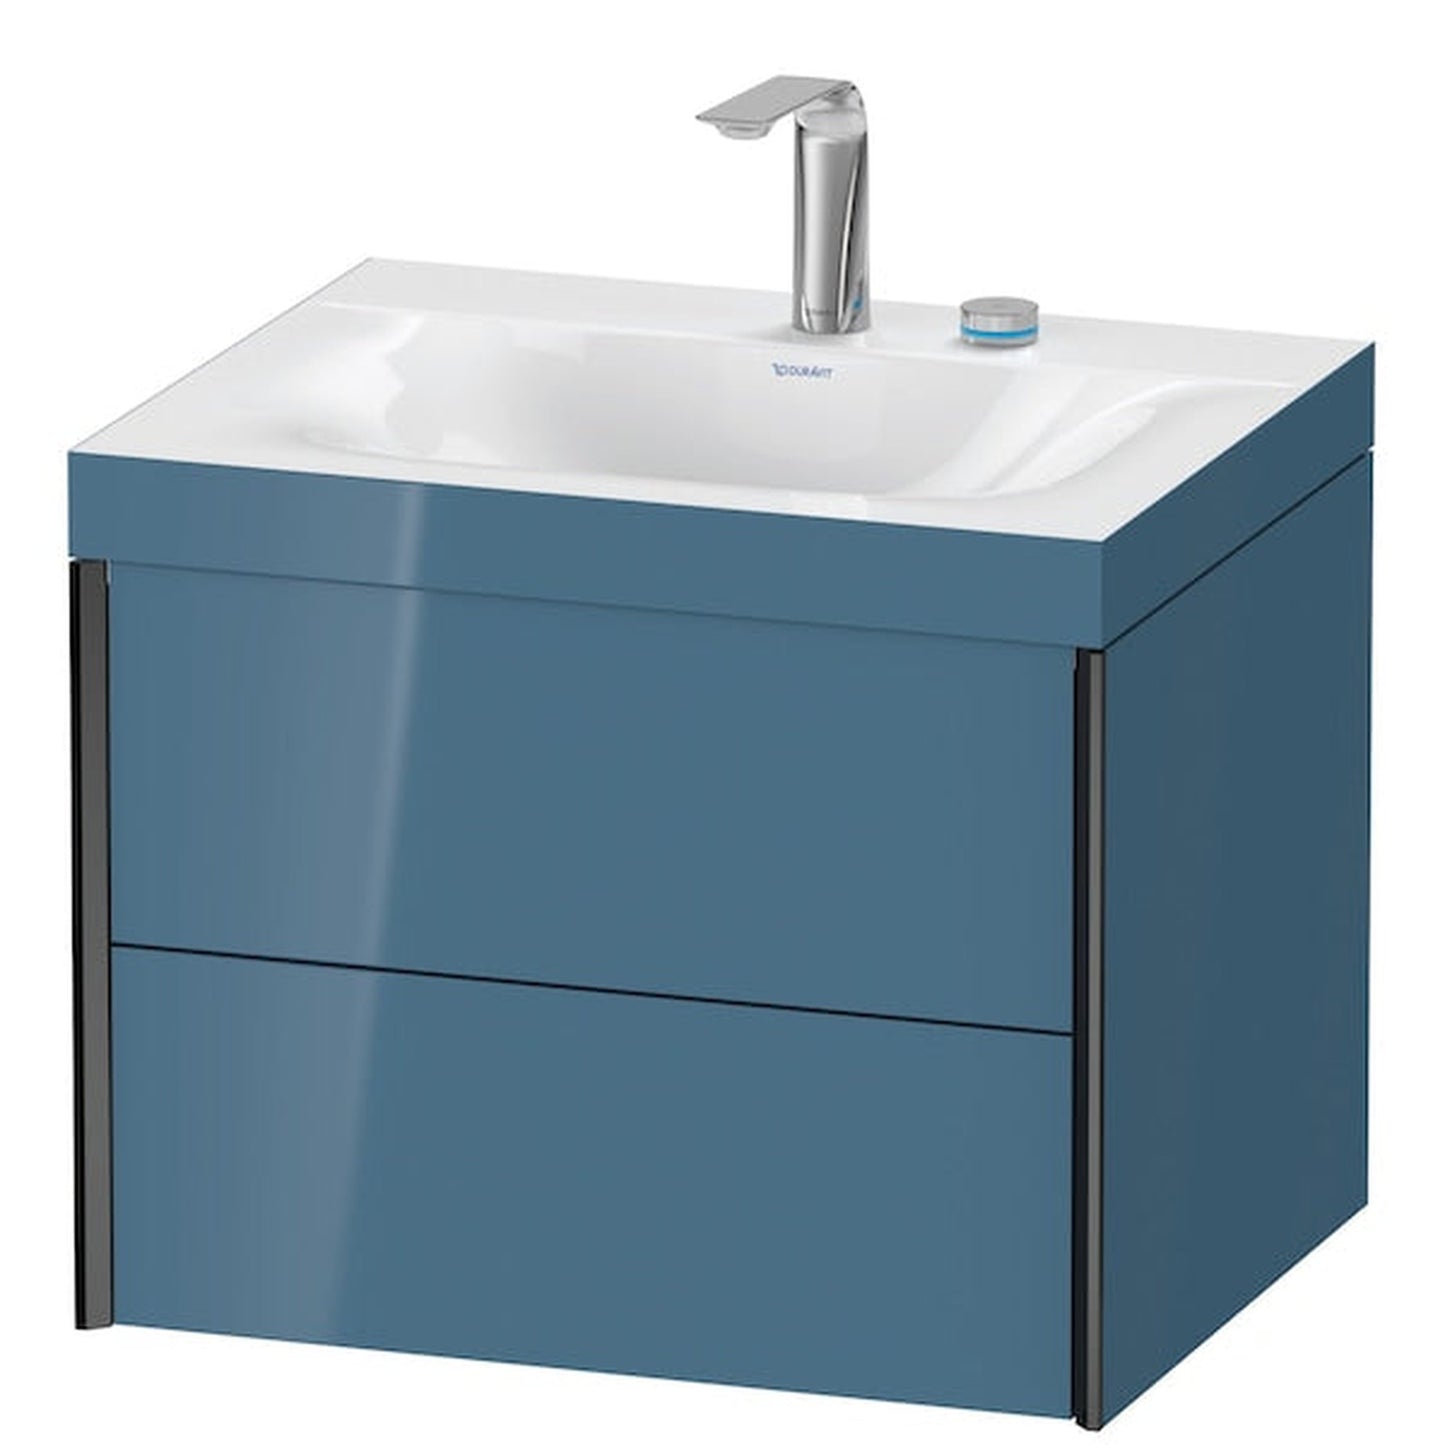 Duravit Xviu 24" x 20" x 19" Two Drawer C-Bonded Wall-Mount Vanity Kit With Two Tap Holes, Stone Blue (XV4614EB247C)